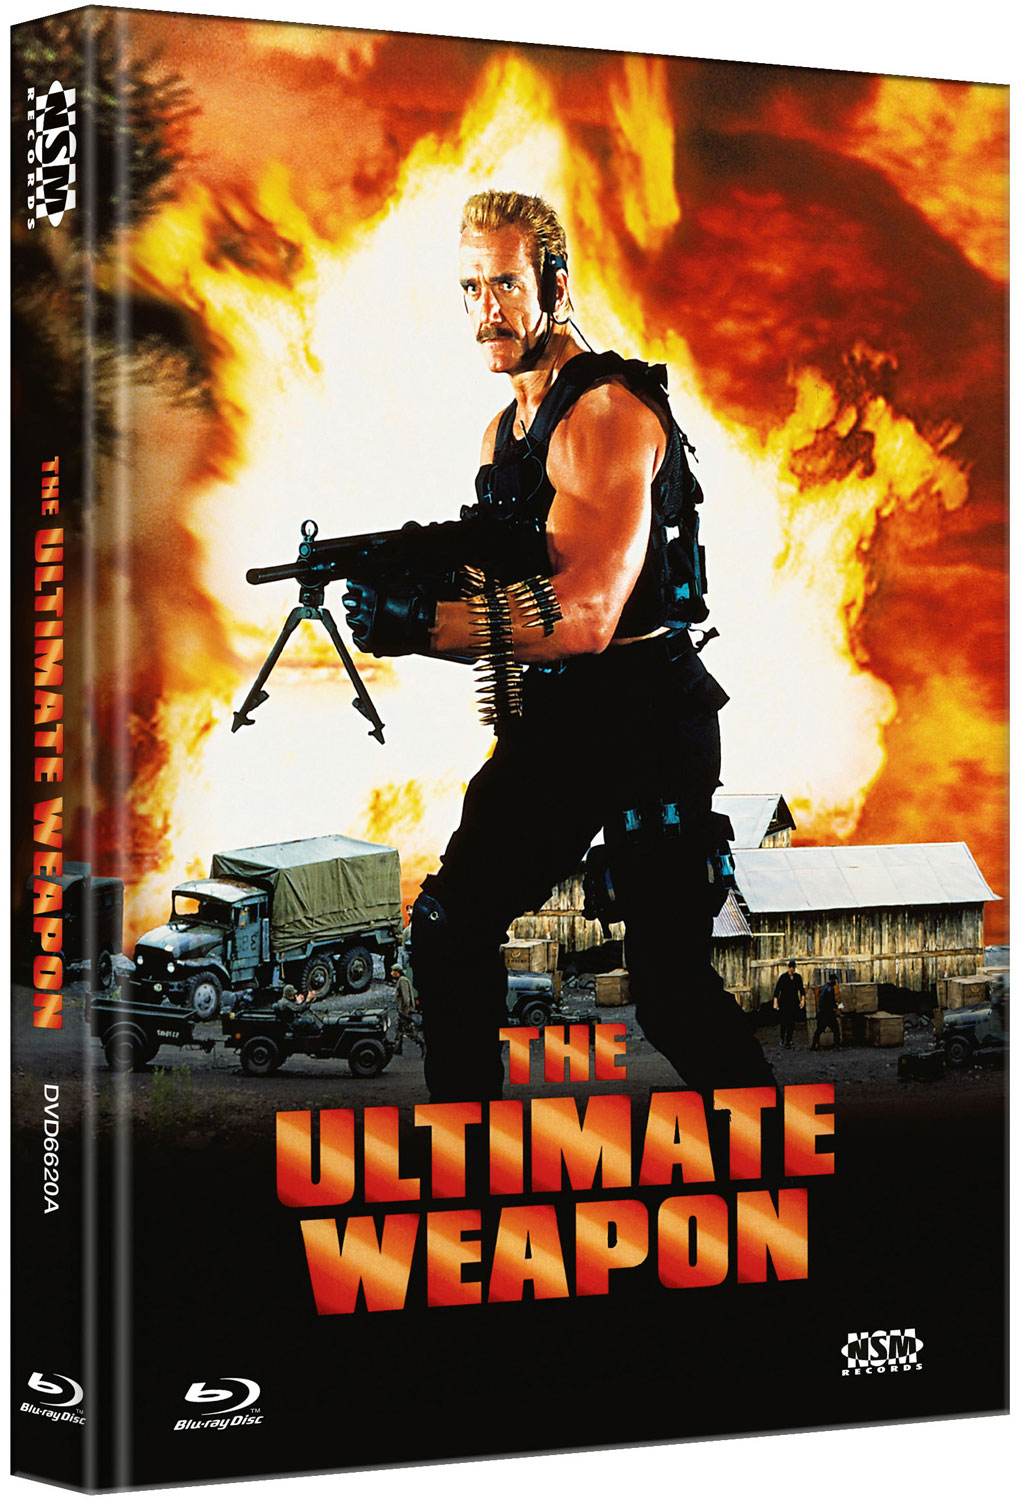 ULTIMATE WEAPON (Blu-Ray+DVD) - Cover A - Mediabook - Limited 222 Edition- 2K Remastered - Uncut